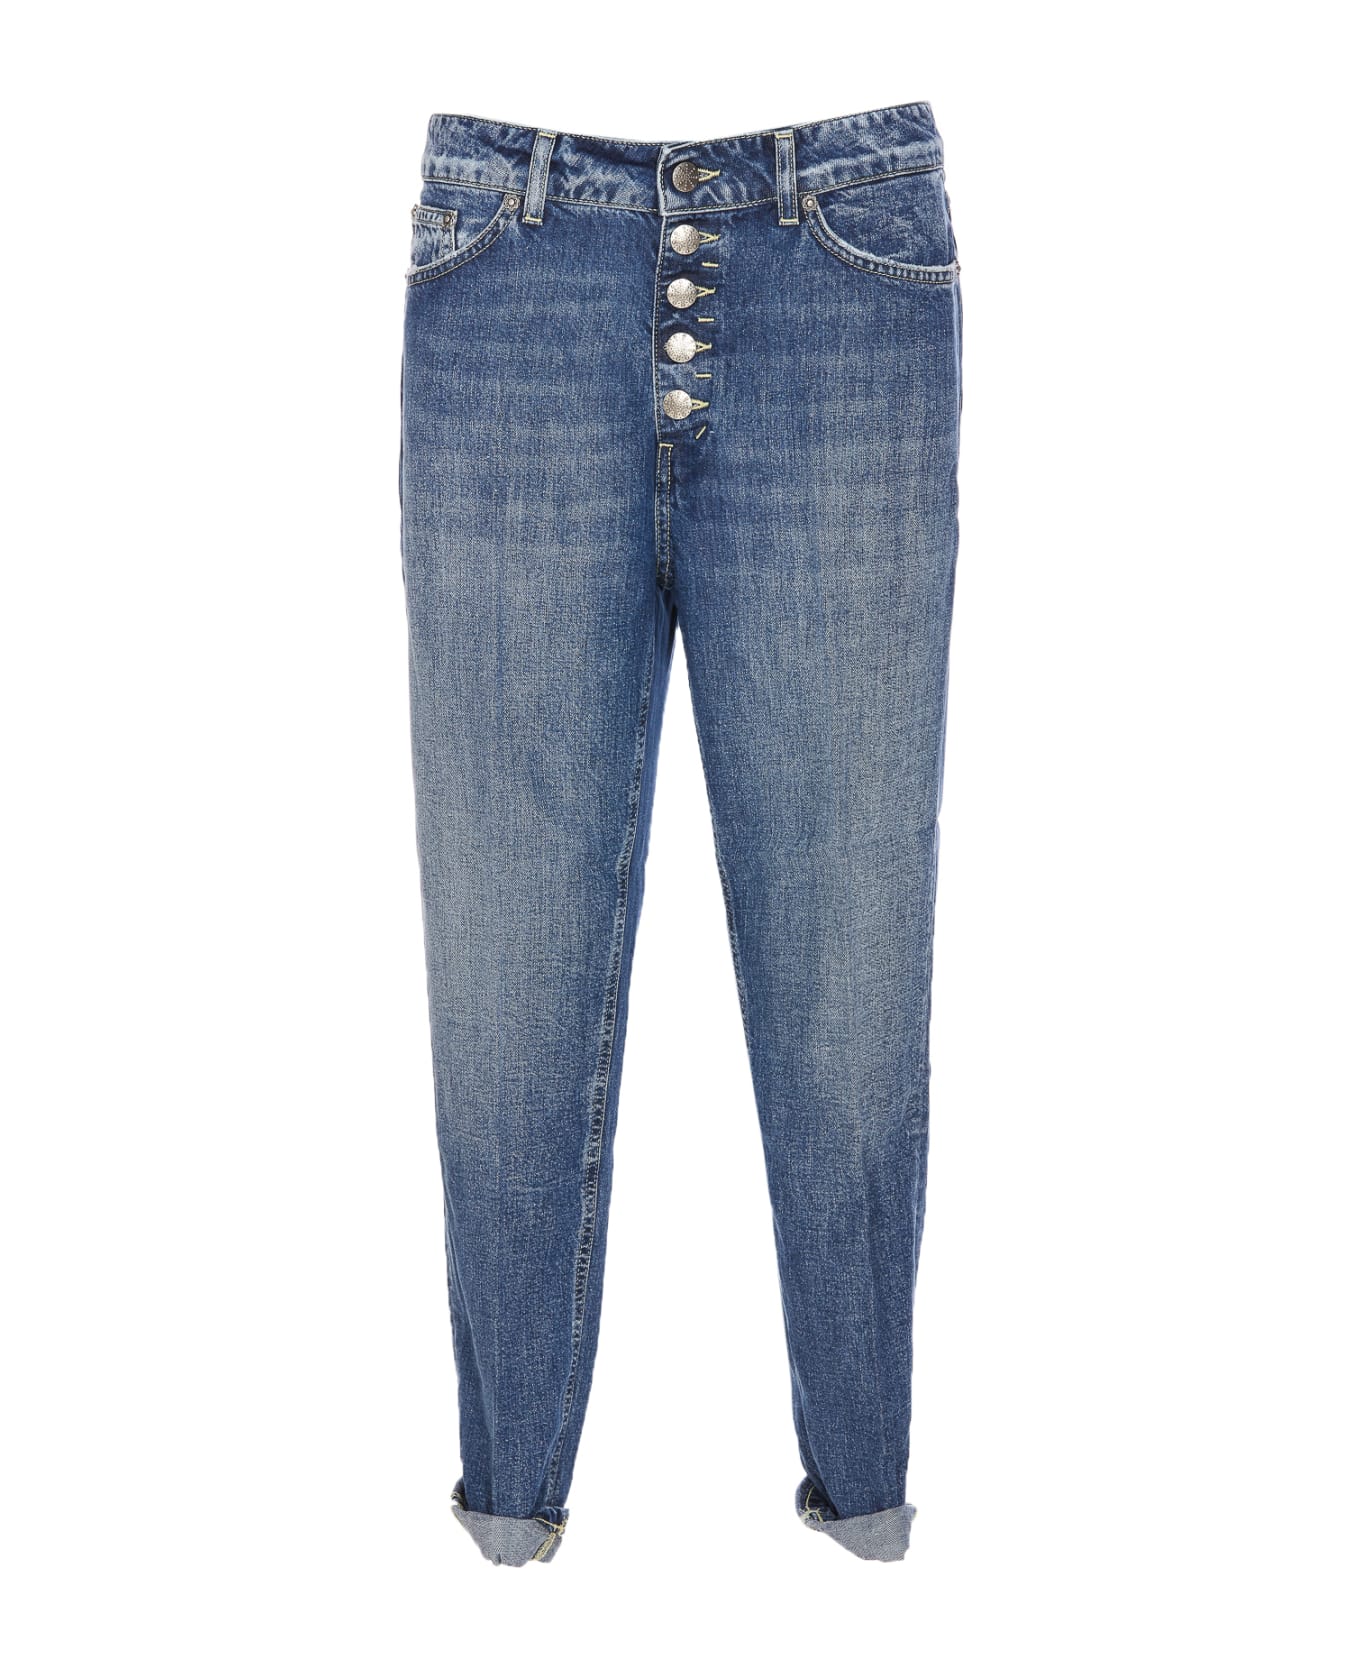 Dondup Blue Hogh-waisted Jeans - BLUE ボトムス